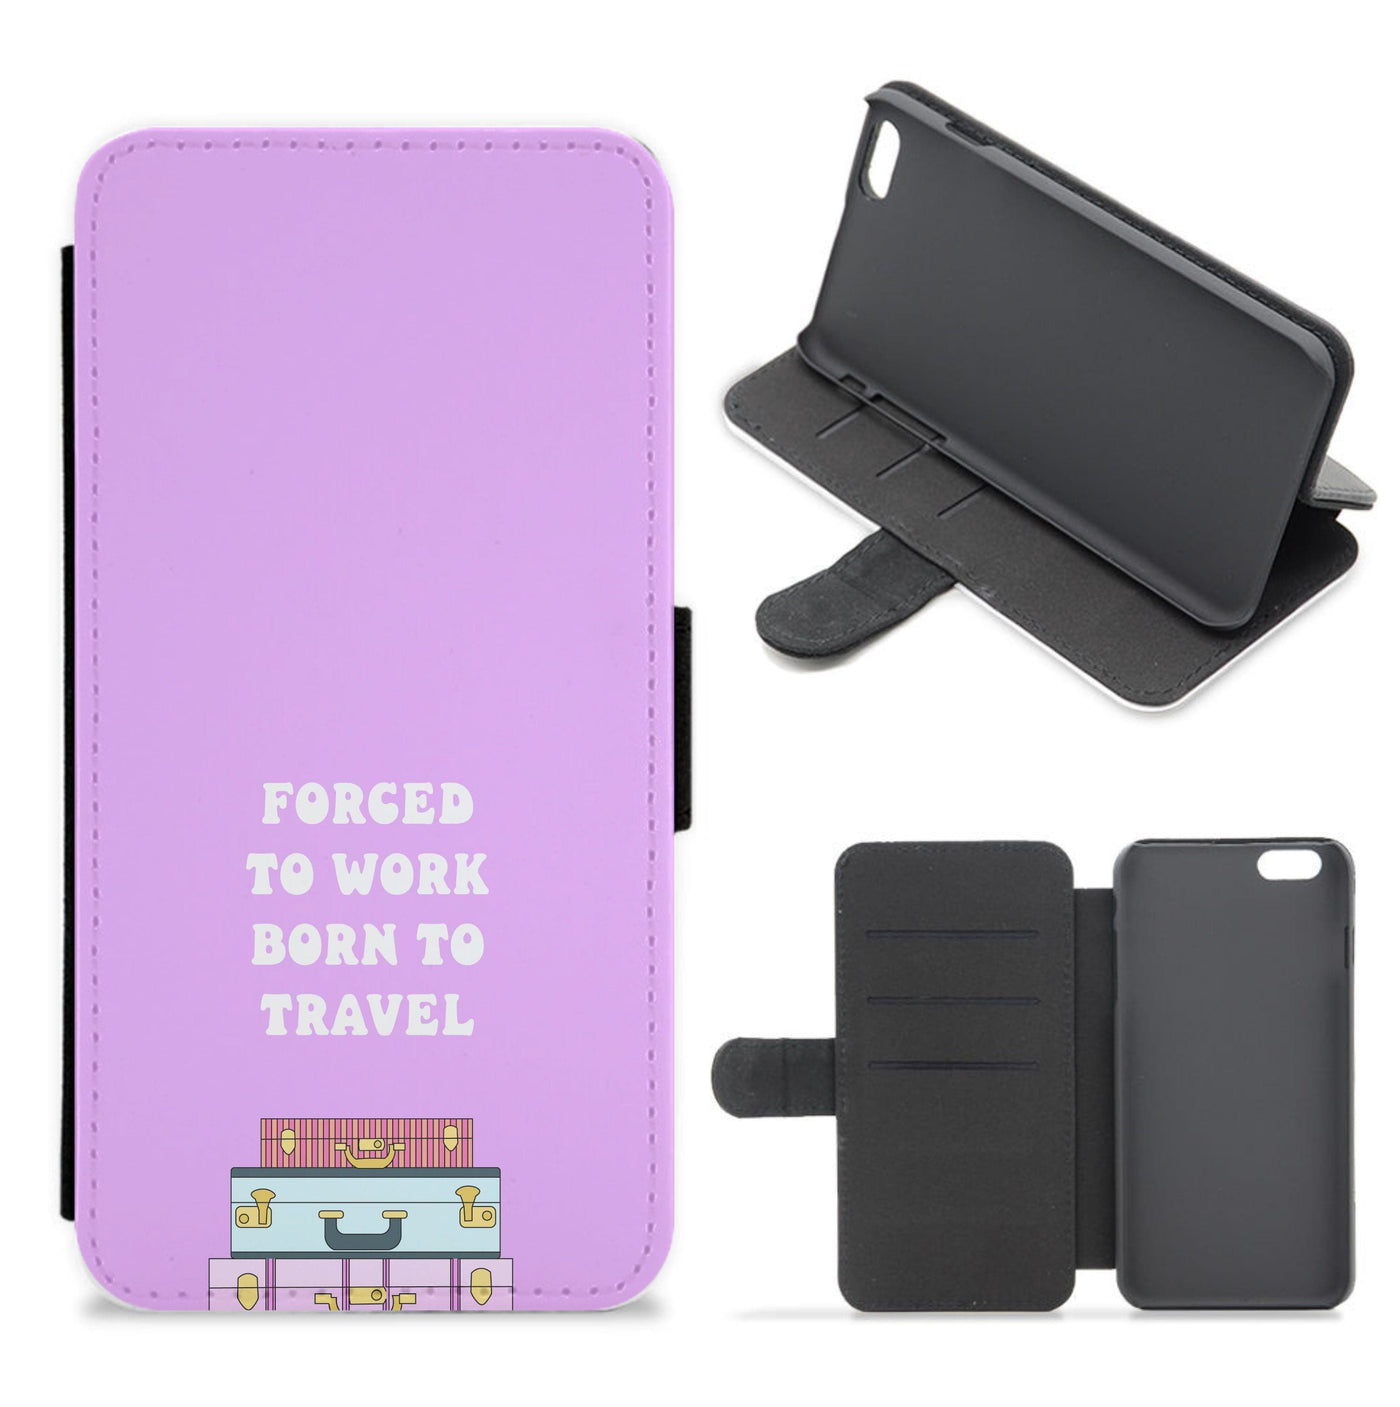 Forced To Work Born To Travel - Travel Flip / Wallet Phone Case